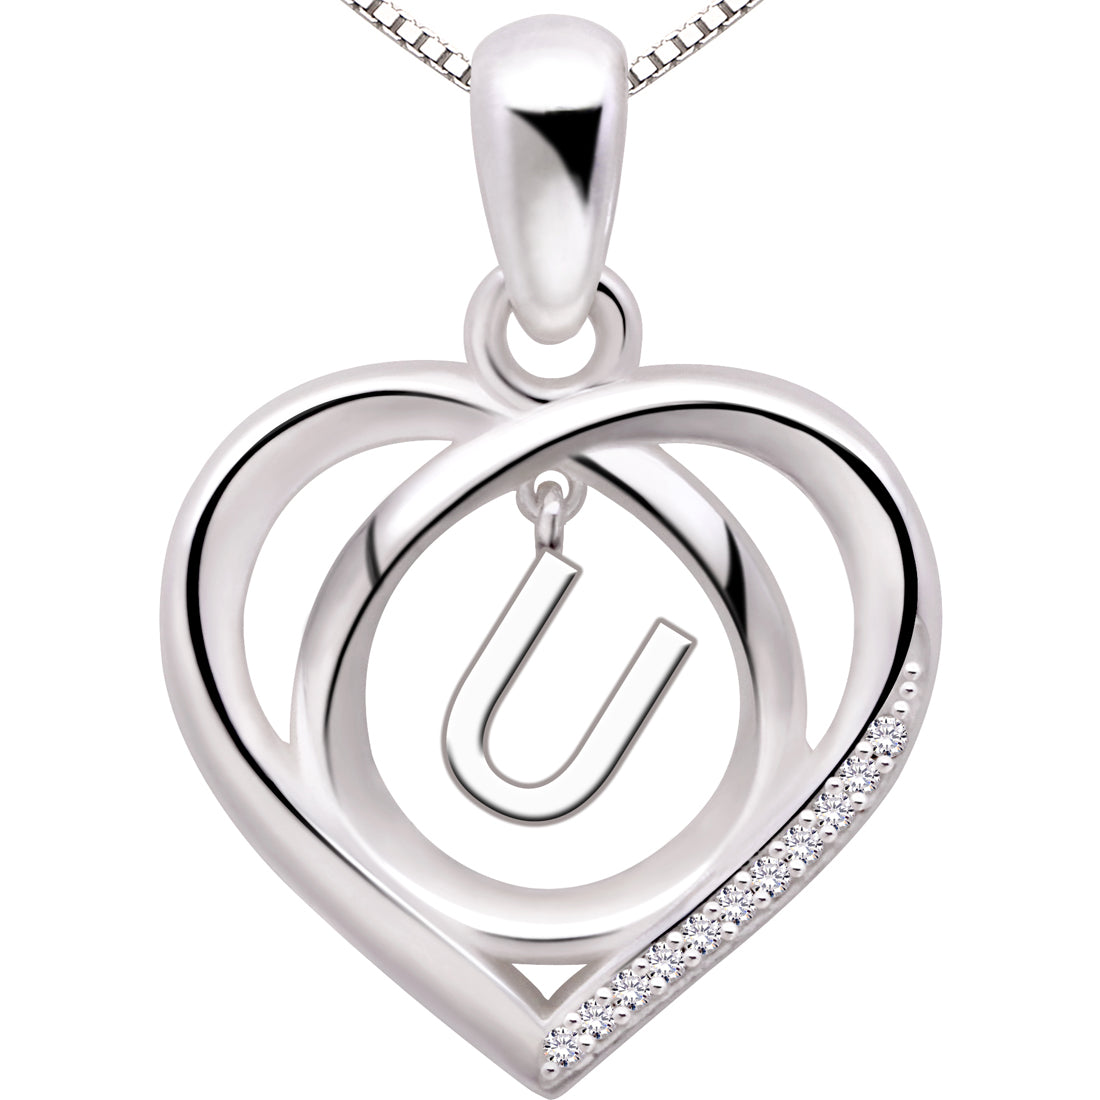 ALOV Jewelry Sterling Silver Initial Letter Alphabet Love Heart Cubic Zirconia Pendant Necklace